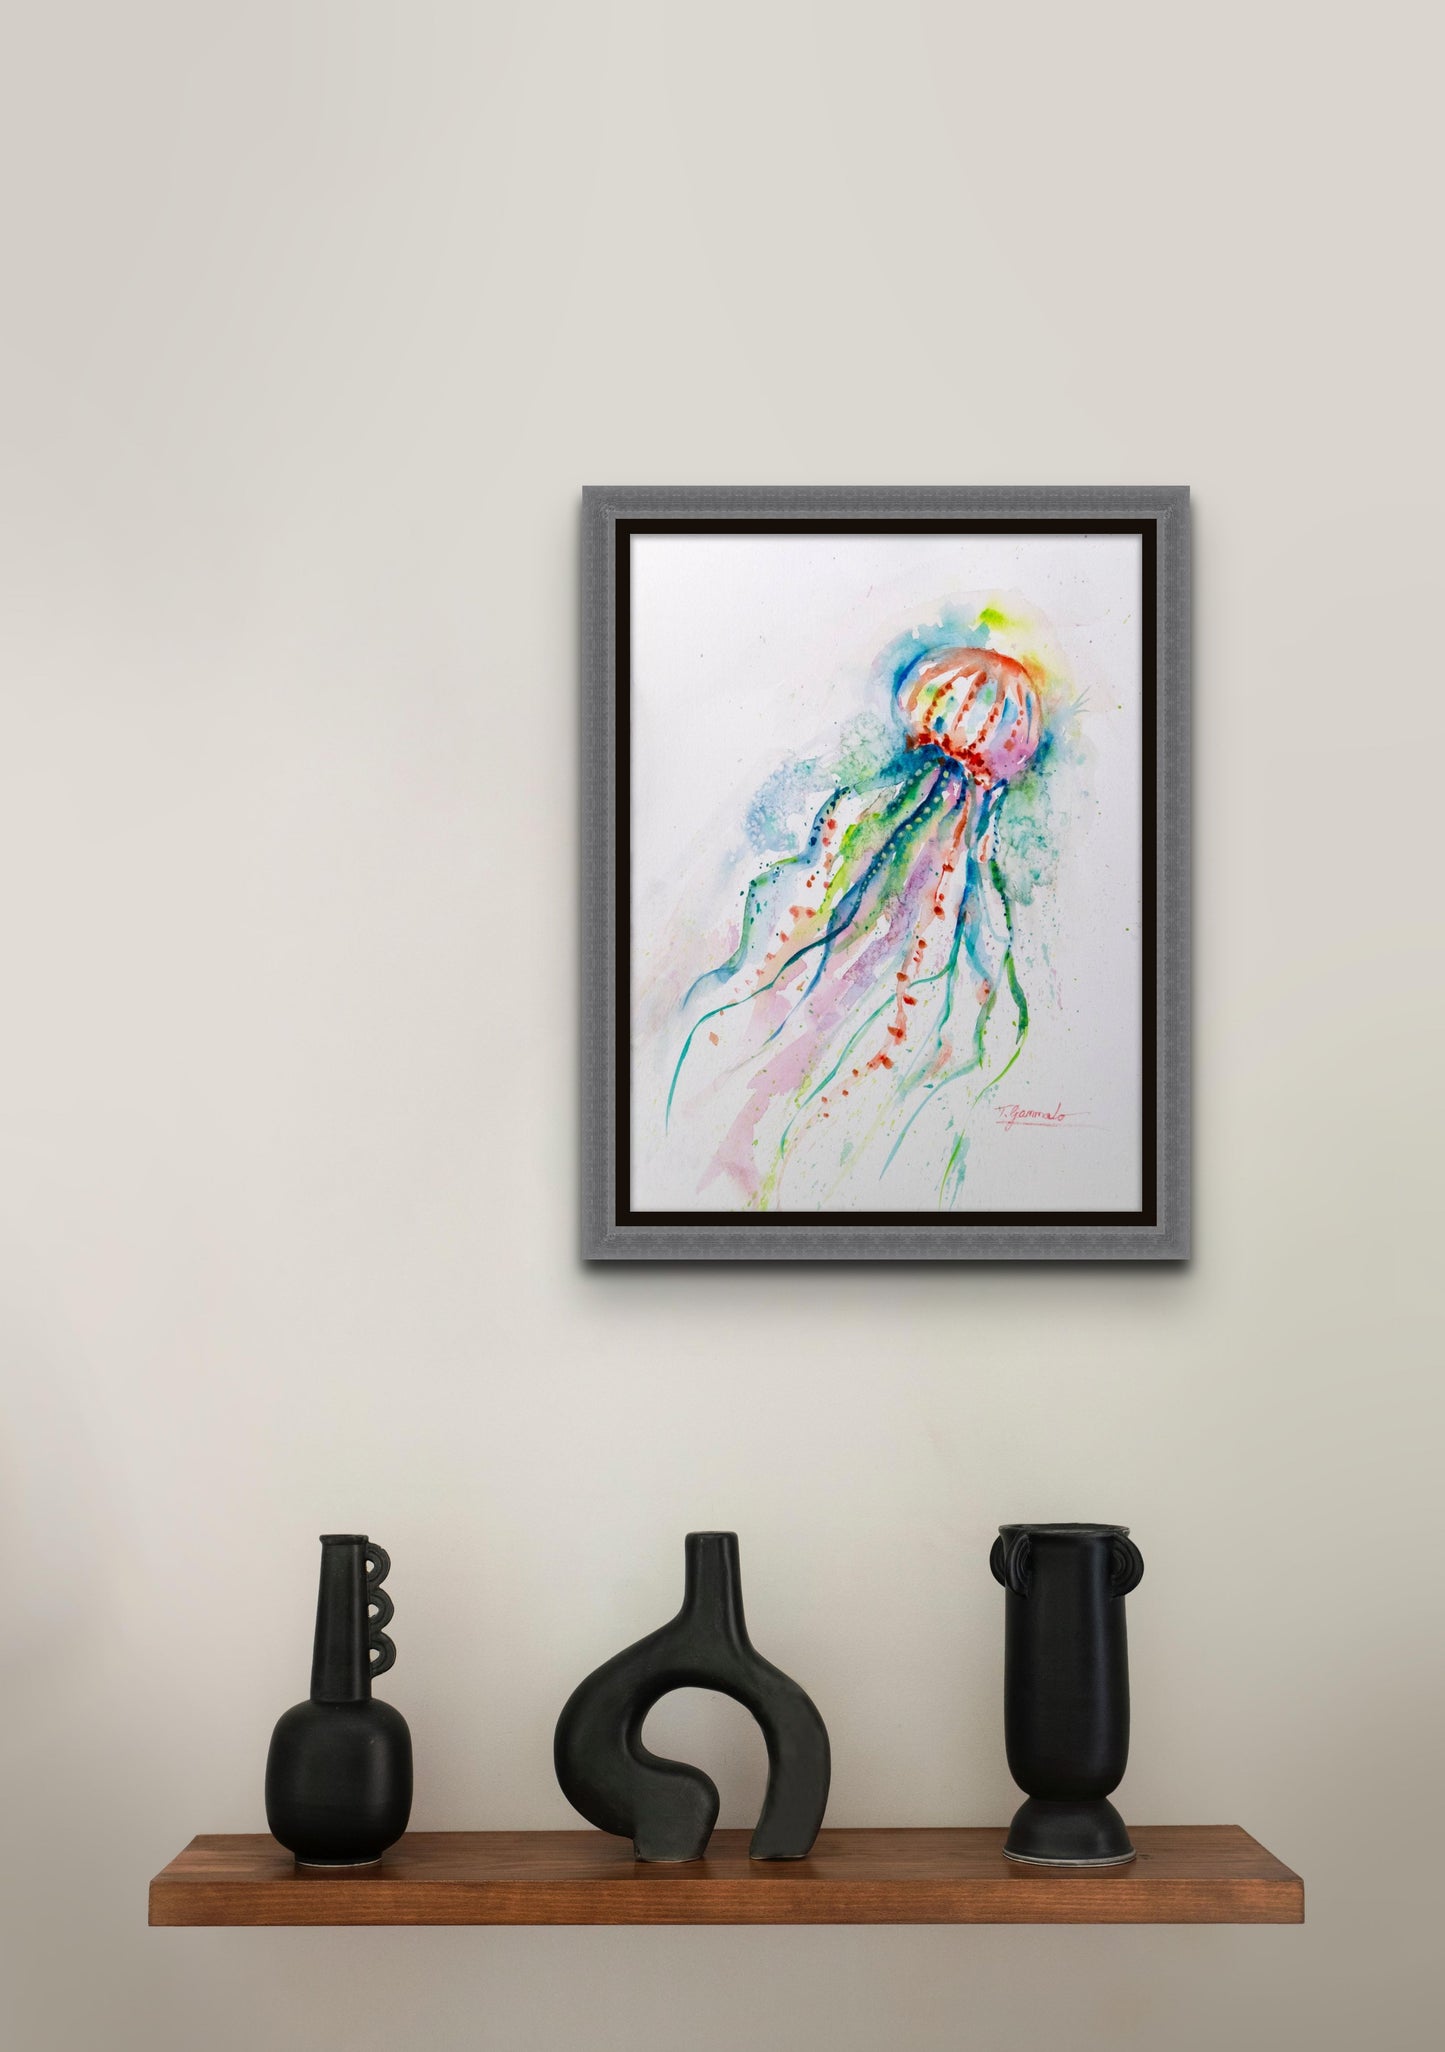 Colorful watercolor drawing of a jellyfish titled 'Going with the Flow' by artist Teri Gammalo, floated against a black background and in a grey wood frame.